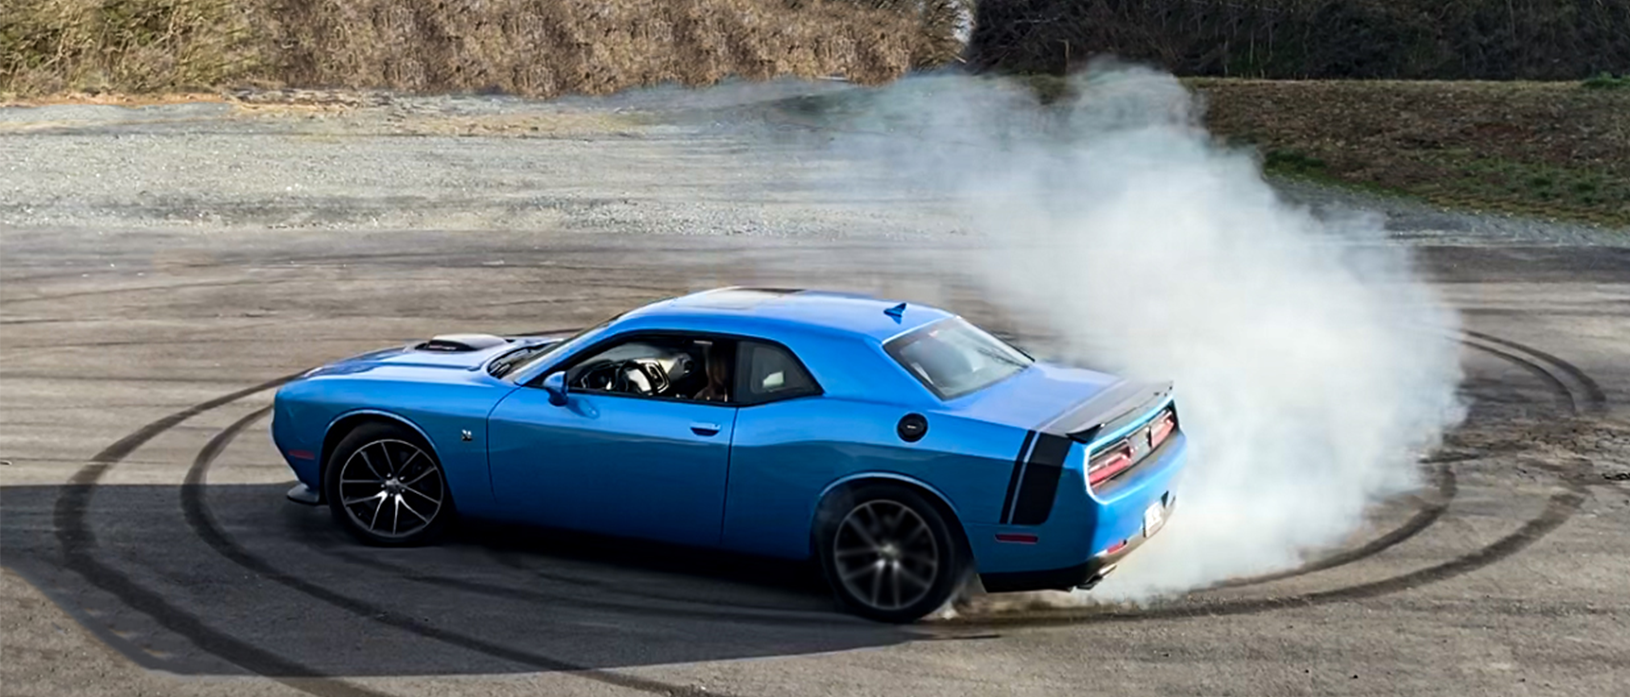 National Police Week: Young racer delivers donuts in a Dodge Challenger and celebrates with a few “donuts” of her own